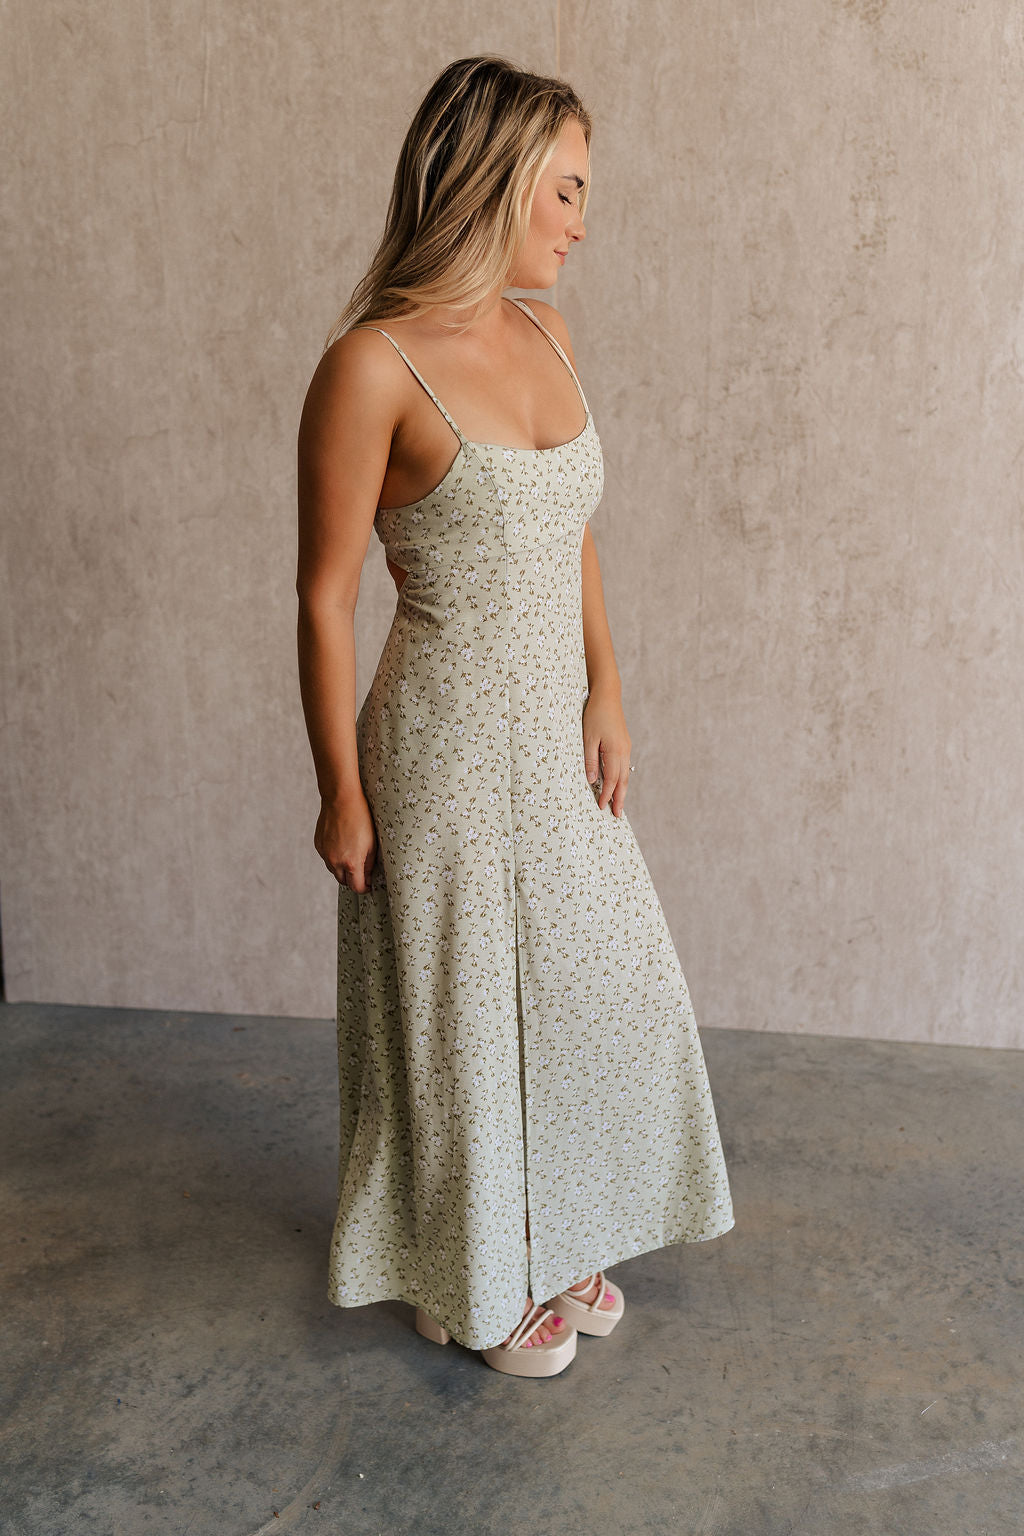 Full body side view of female model wearing the Kaitlyn Sage Floral Maxi Dress that has sage green fabric with a white floral print, thin straps,a side slit and an open back with a tie.